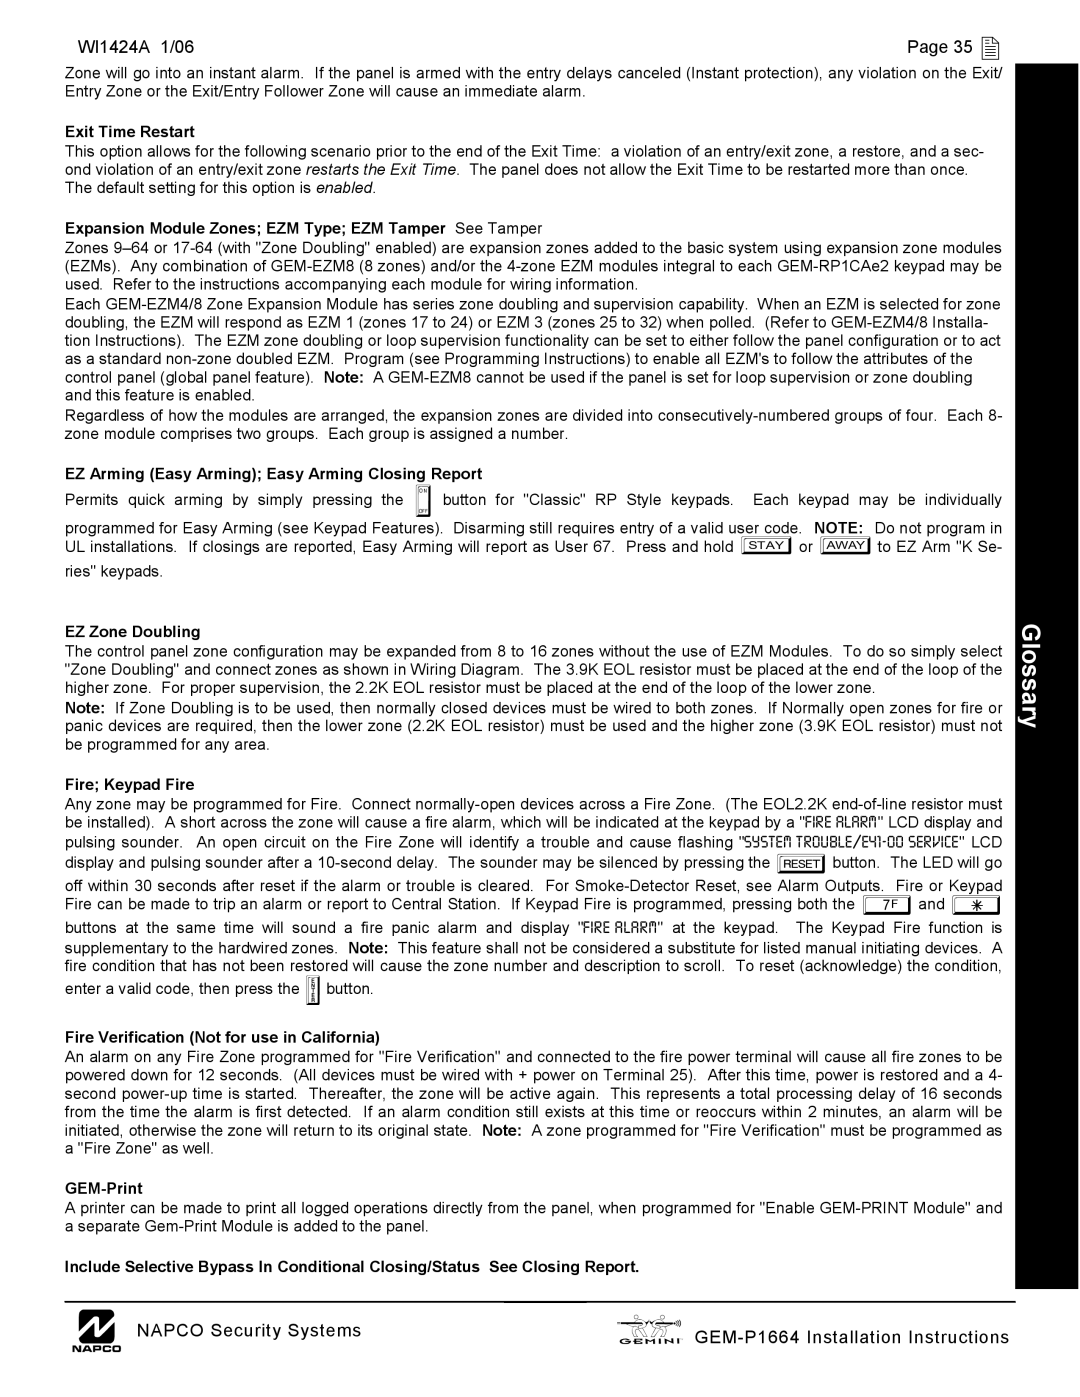 Napco Security Technologies GEM-P1664 Glossary, Exit Time Restart, EZ Arming Easy Arming Easy Arming Closing Report 